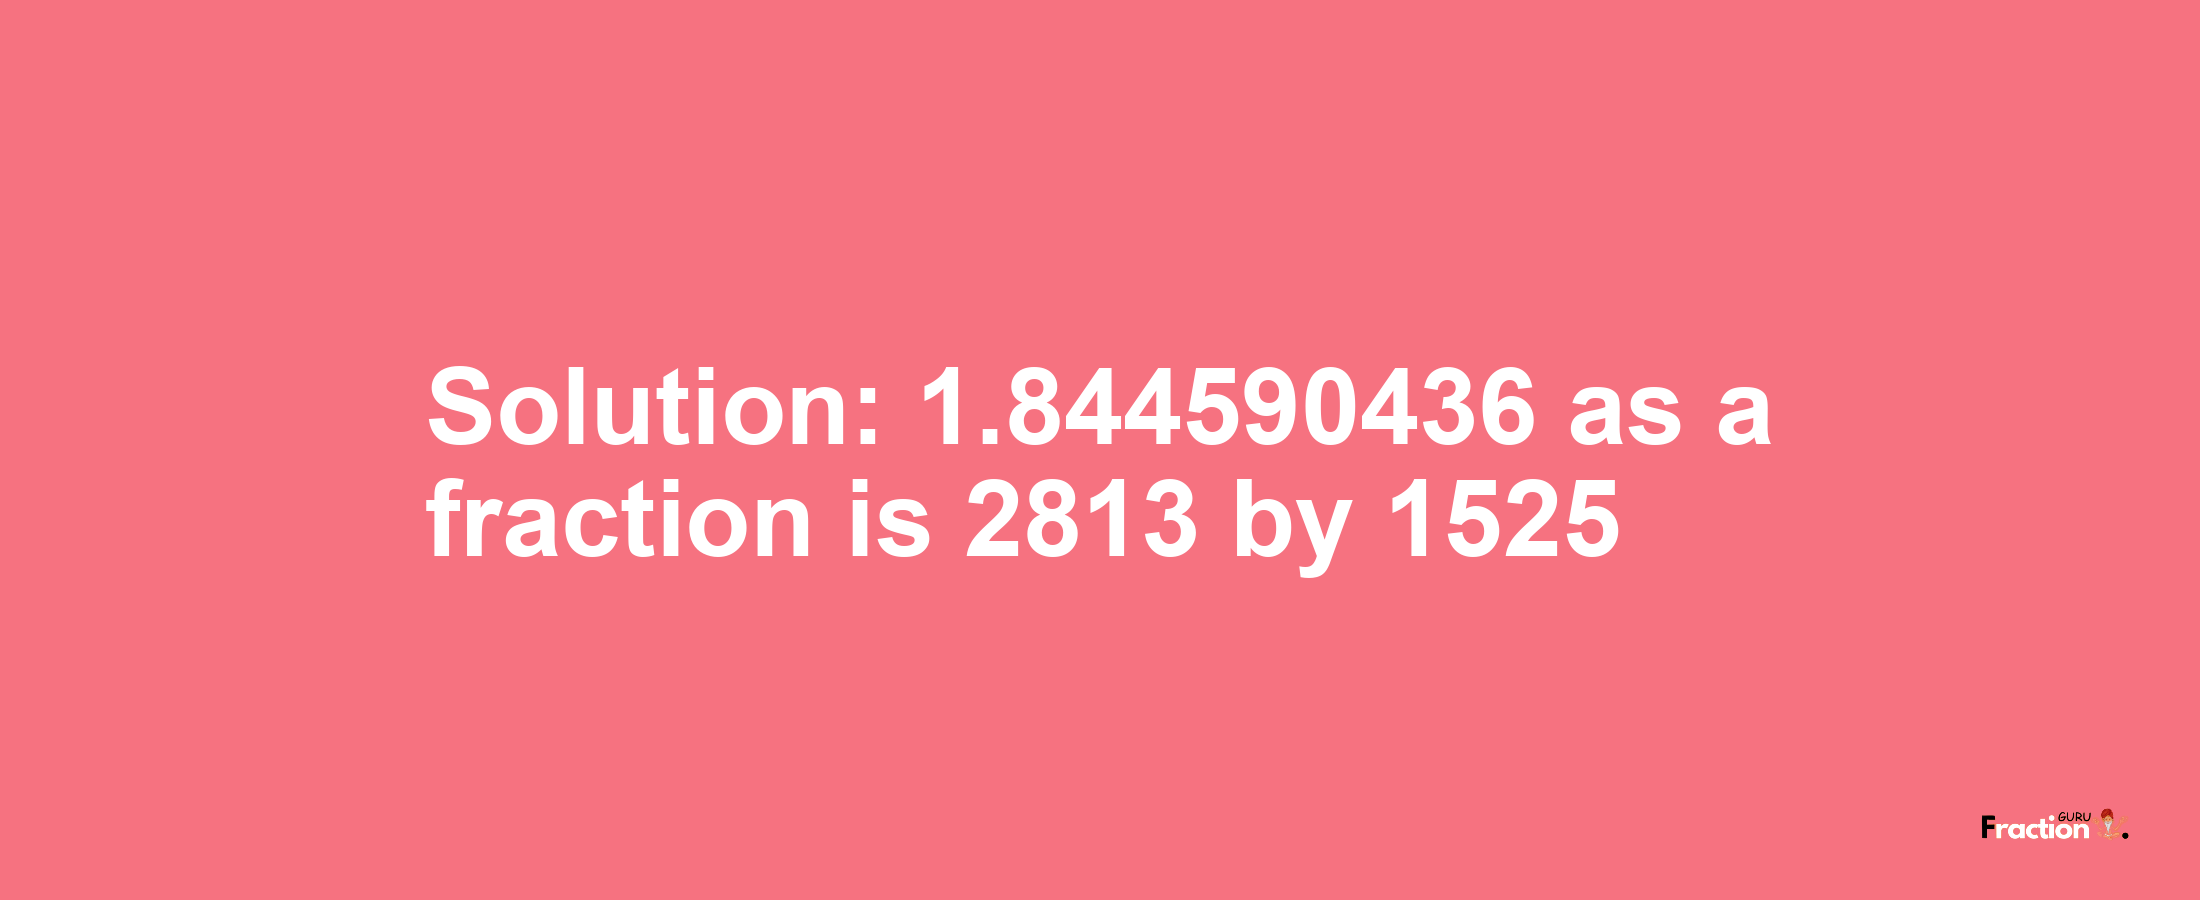 Solution:1.844590436 as a fraction is 2813/1525